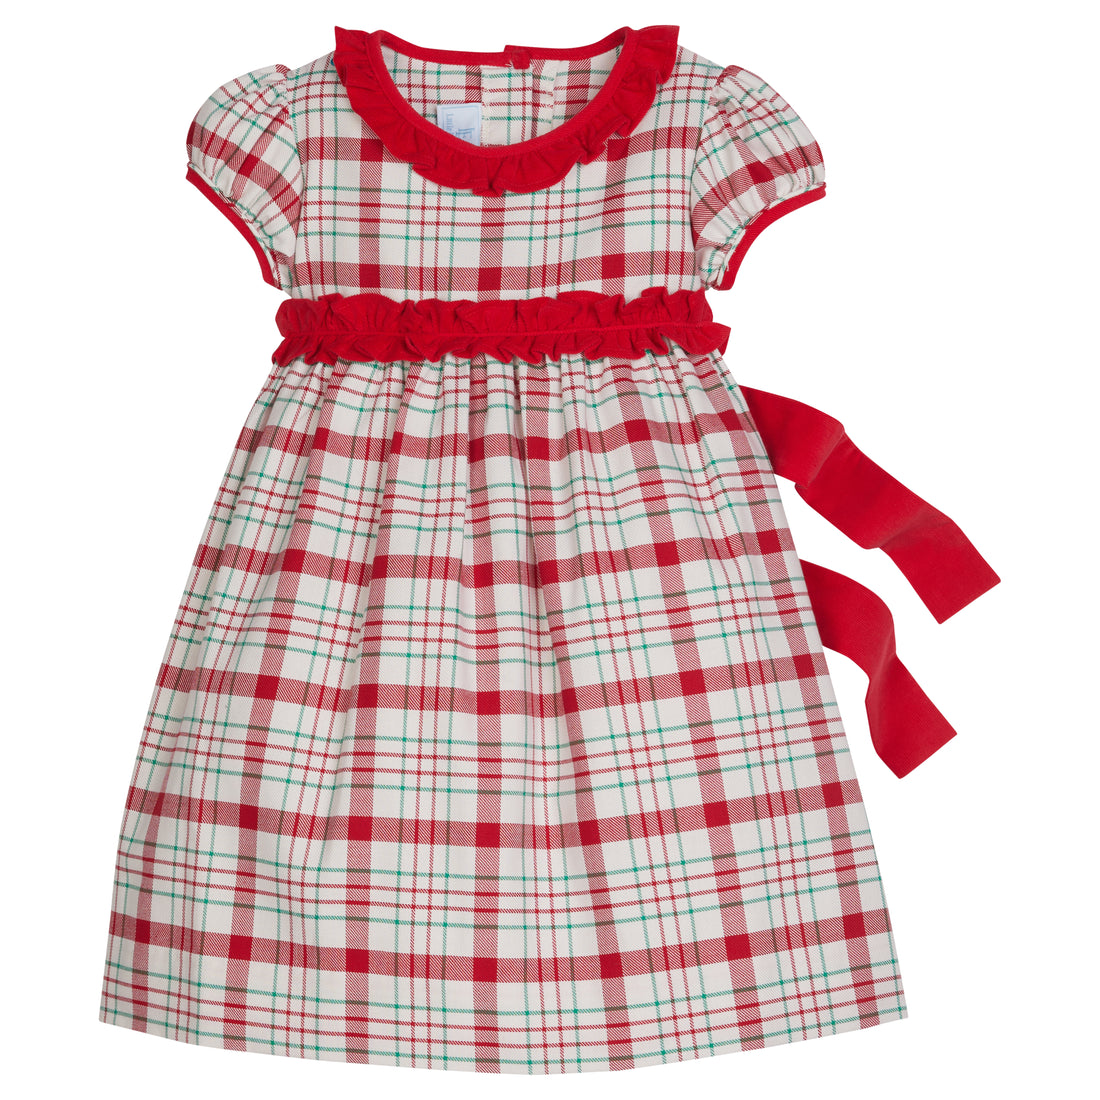 Little English traditional holiday dress for girls, red corduroy and plaid dress with sash for toddler girls, classic holiday dress